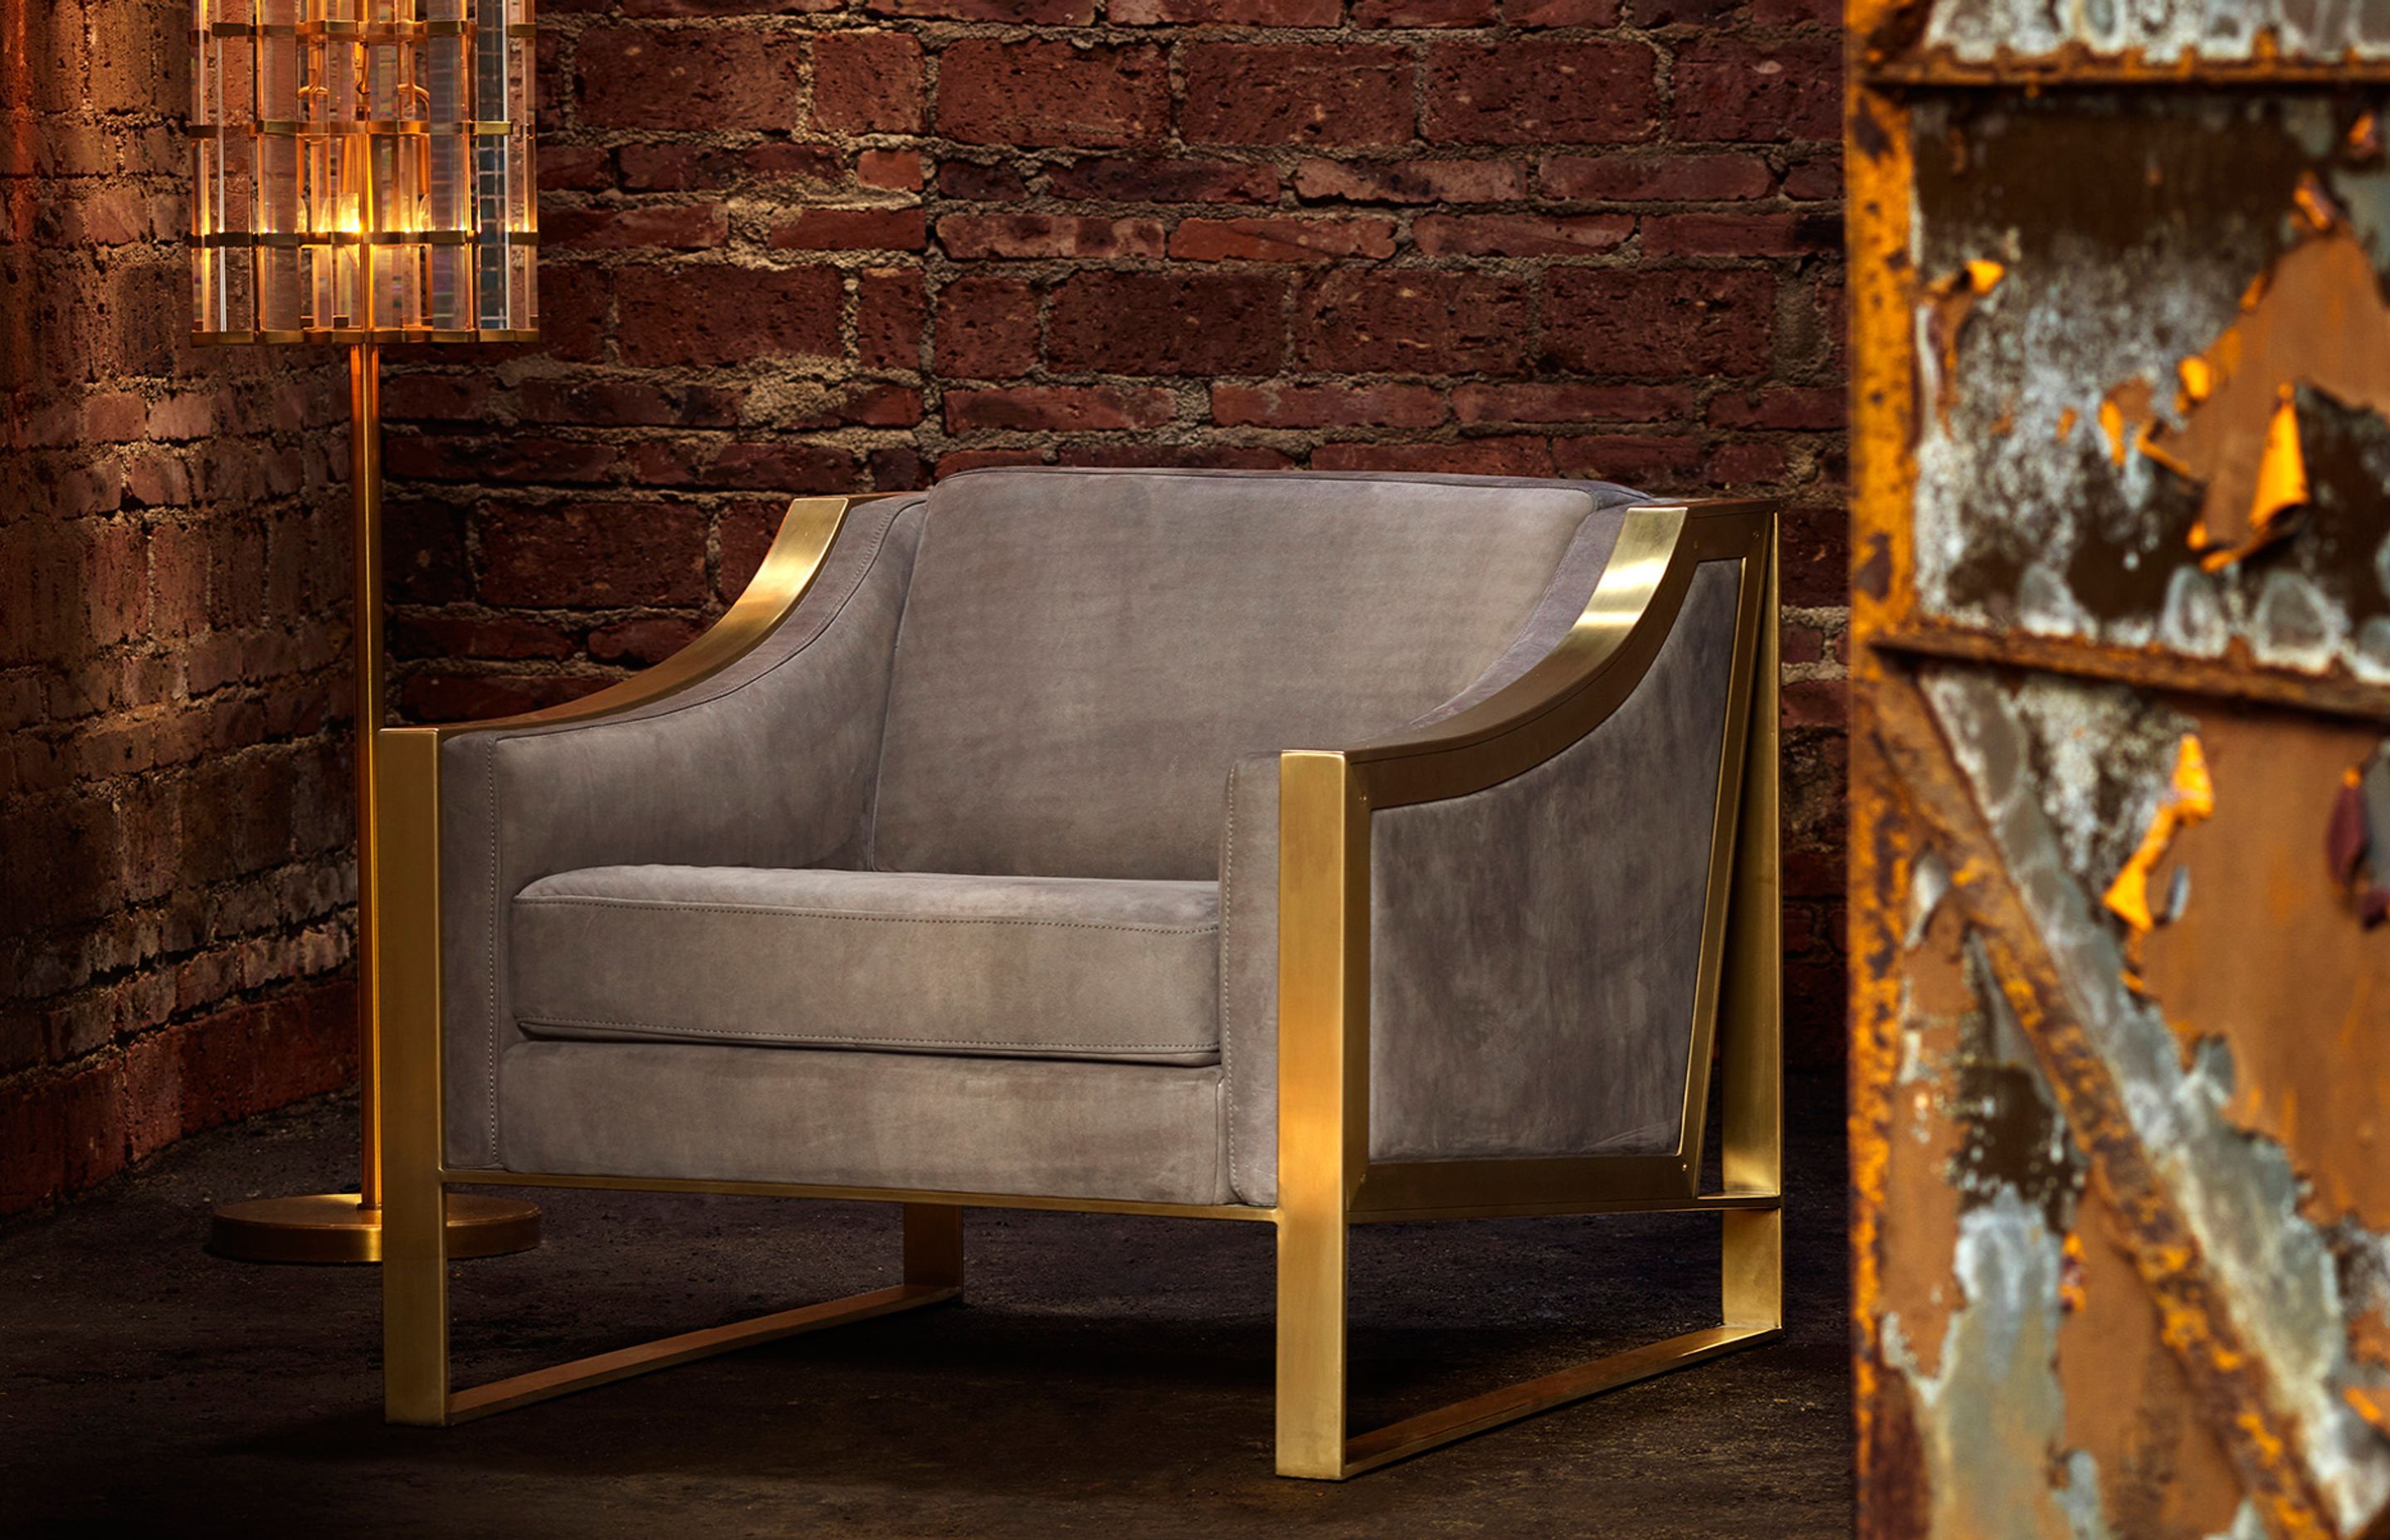 The Wall Street Armchair is a twist on a classic form, with ultra-comfortable seating